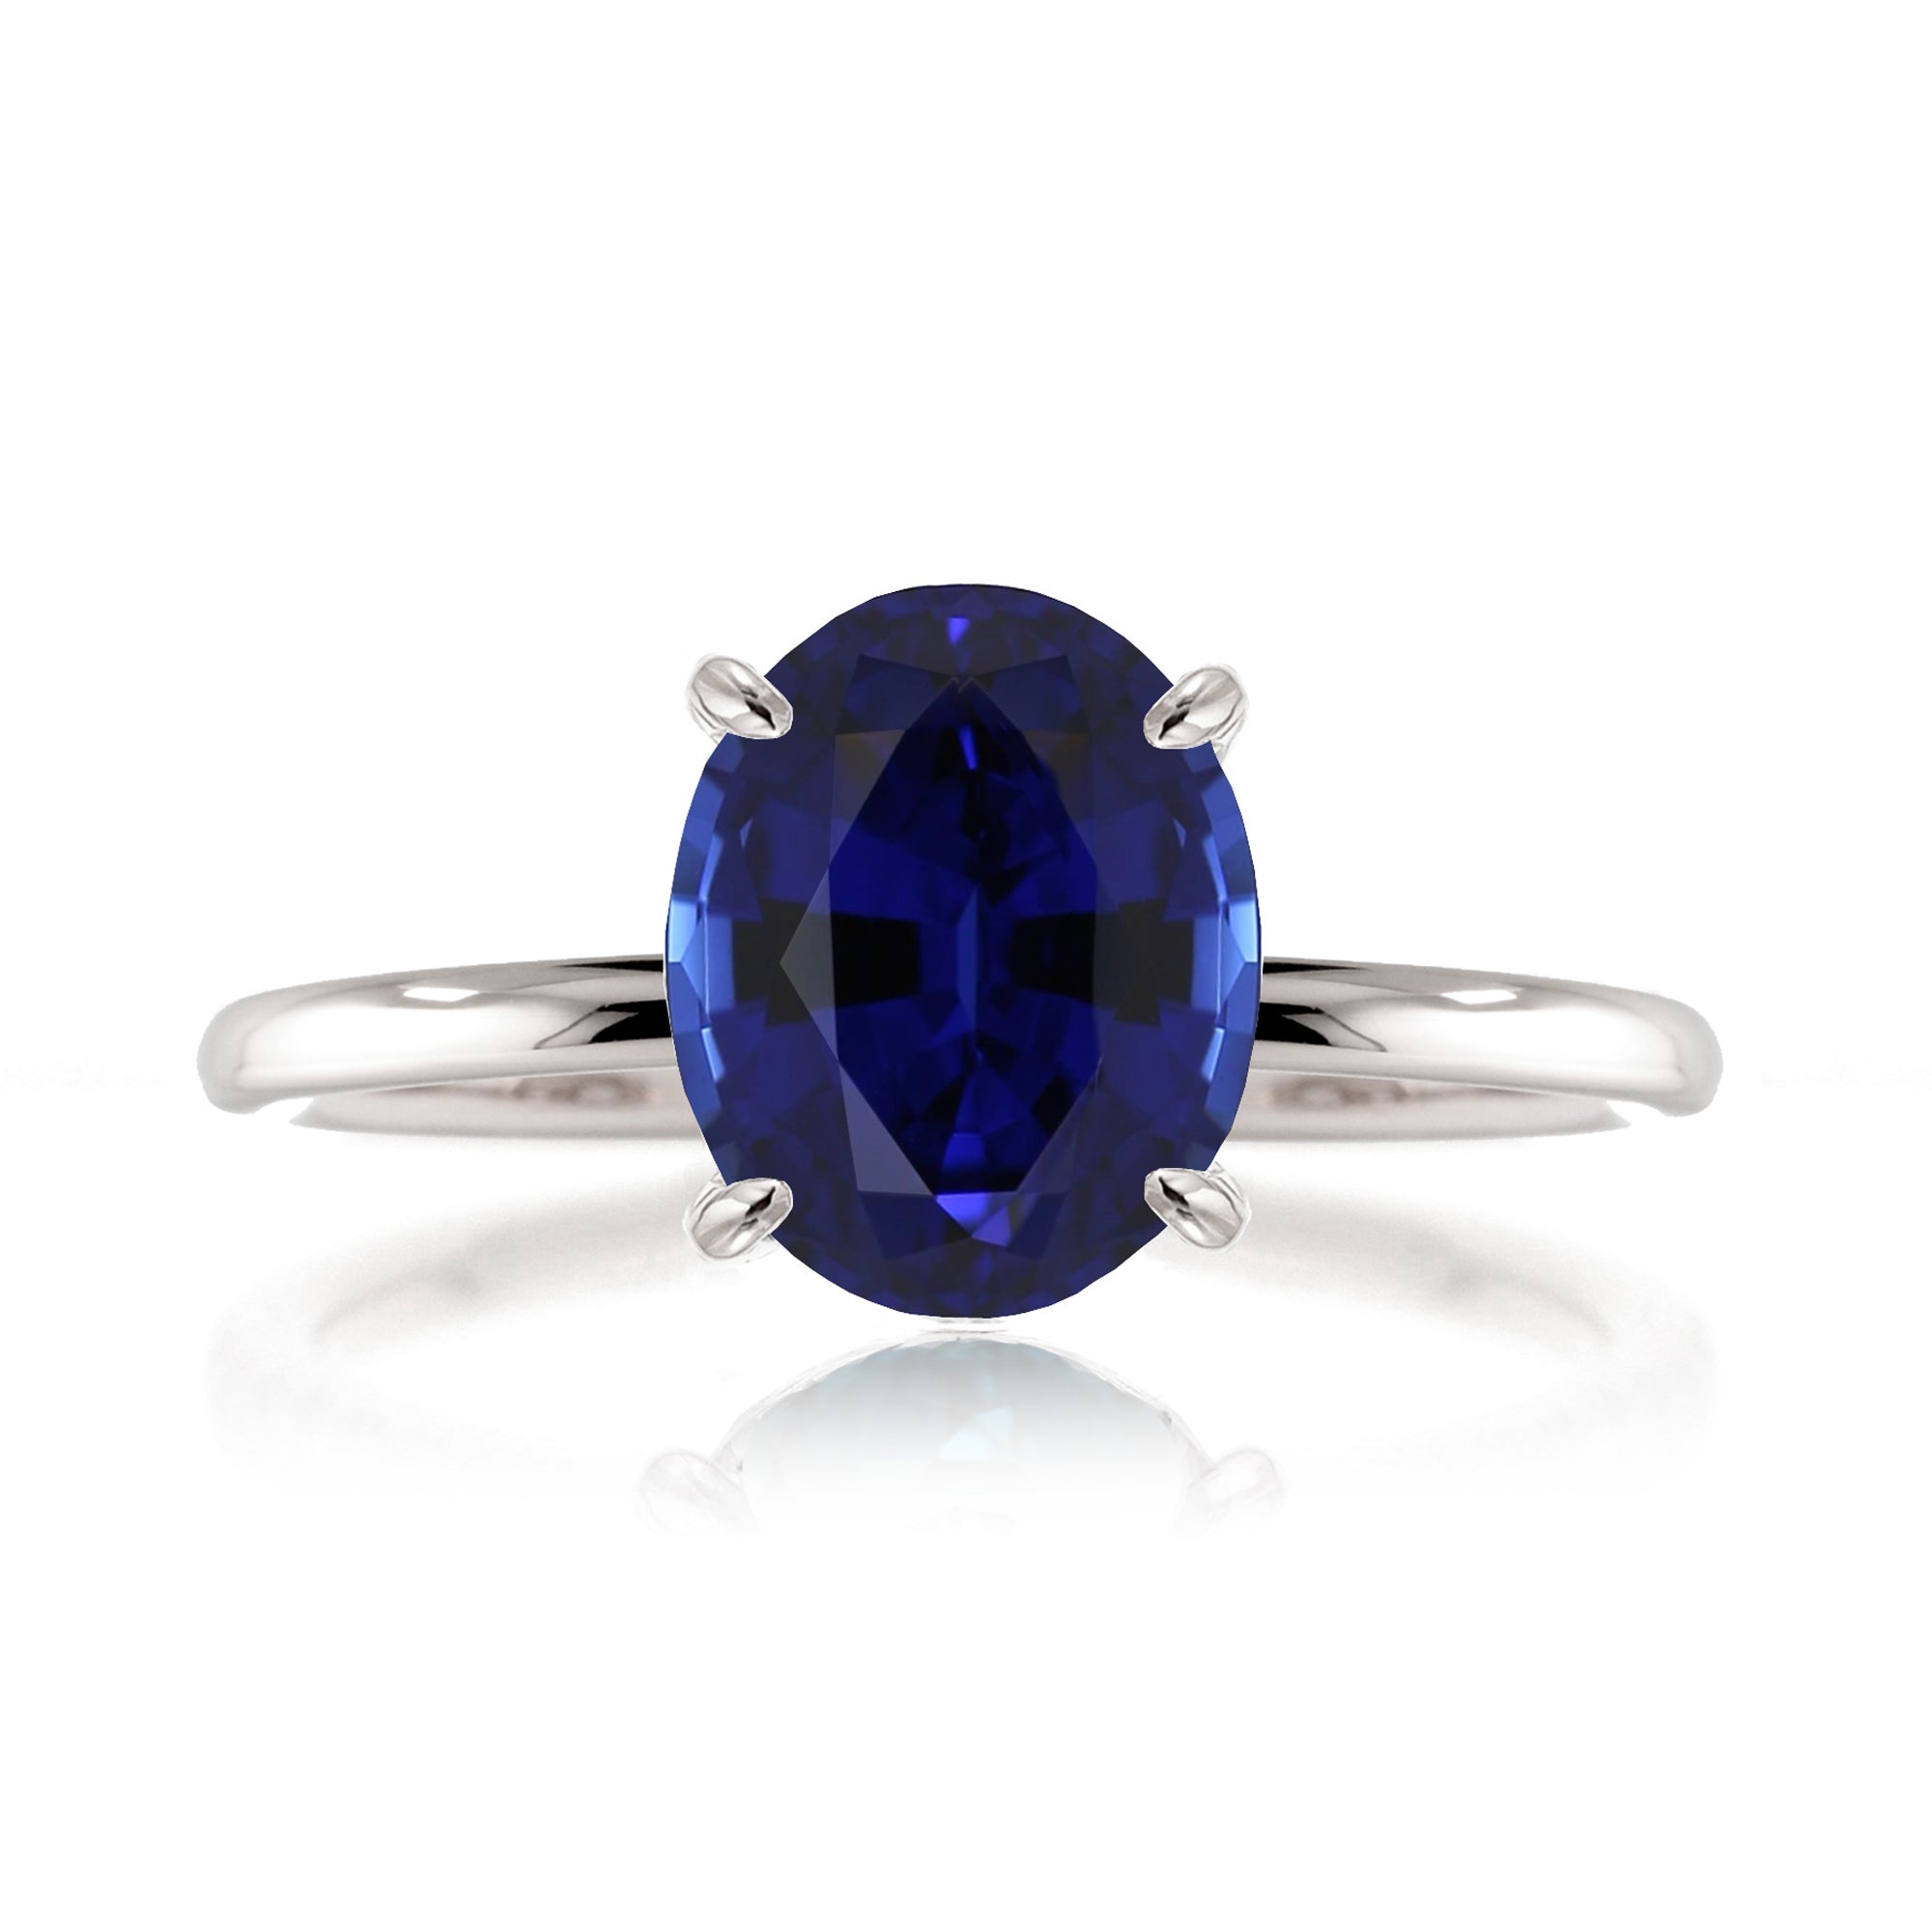 Oval blue sapphire solid band engagement ring white gold - the Ava